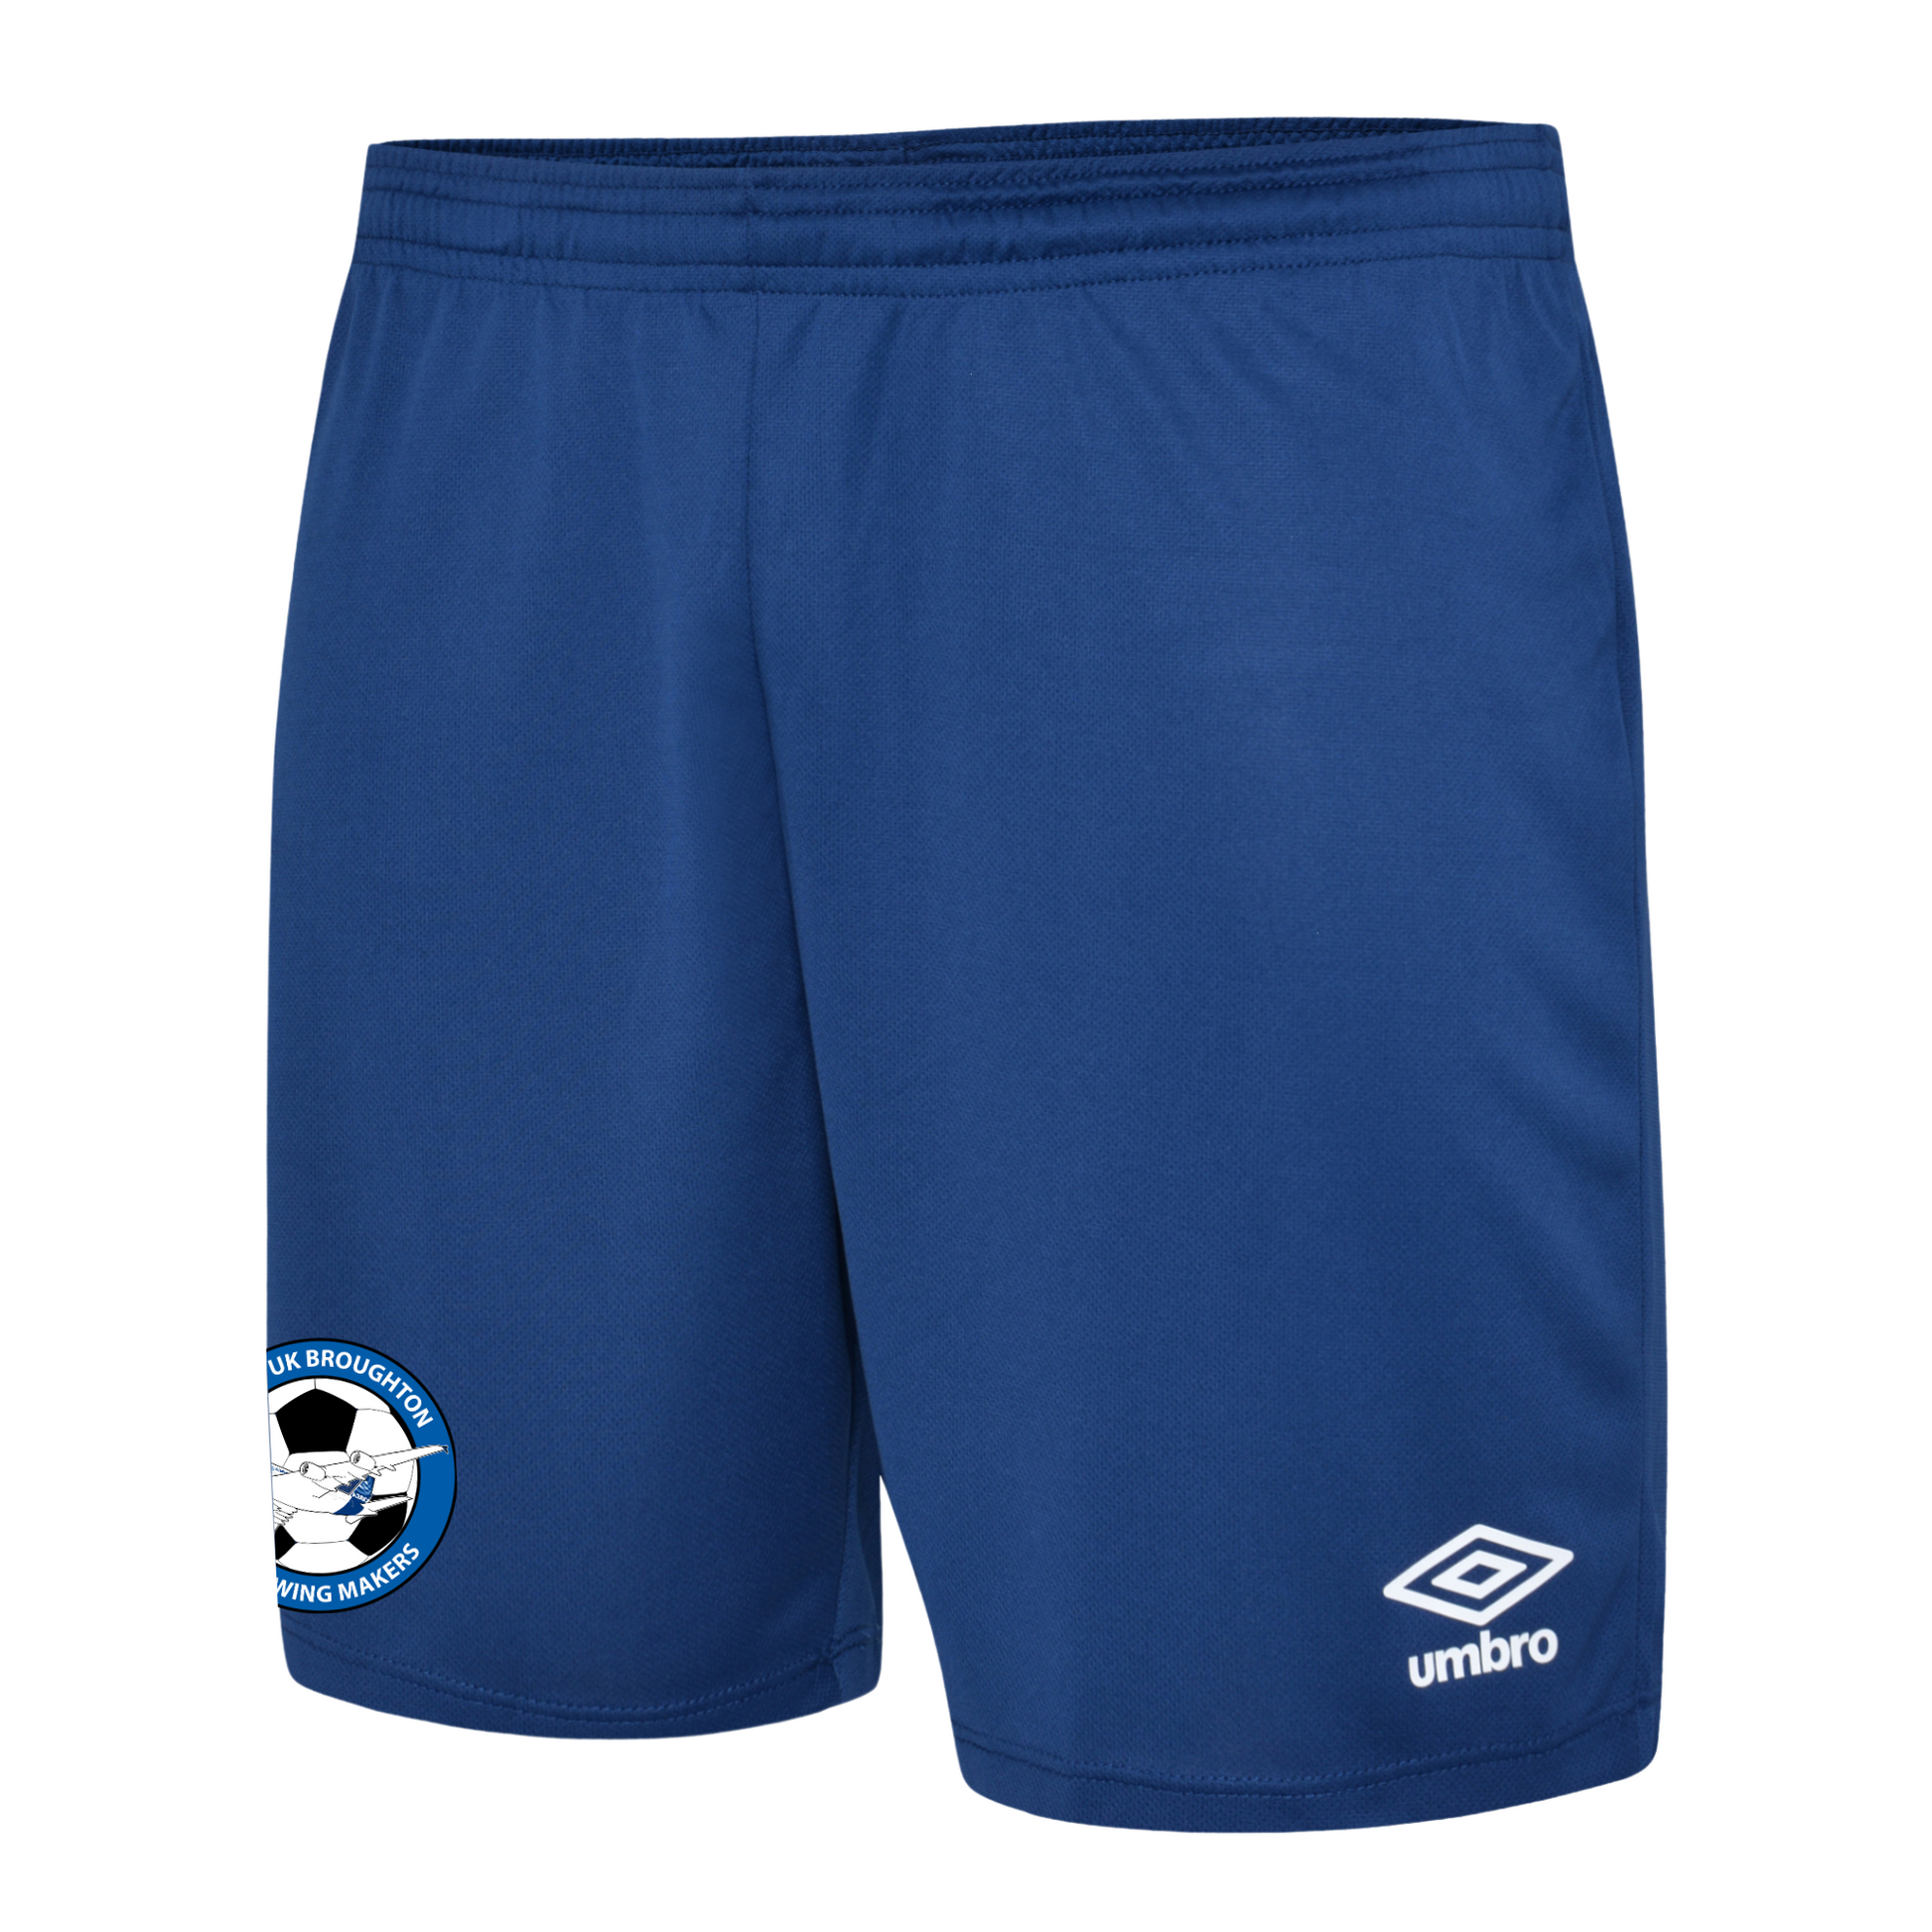 Airbus Navy Training Shorts - Queensferry Sports